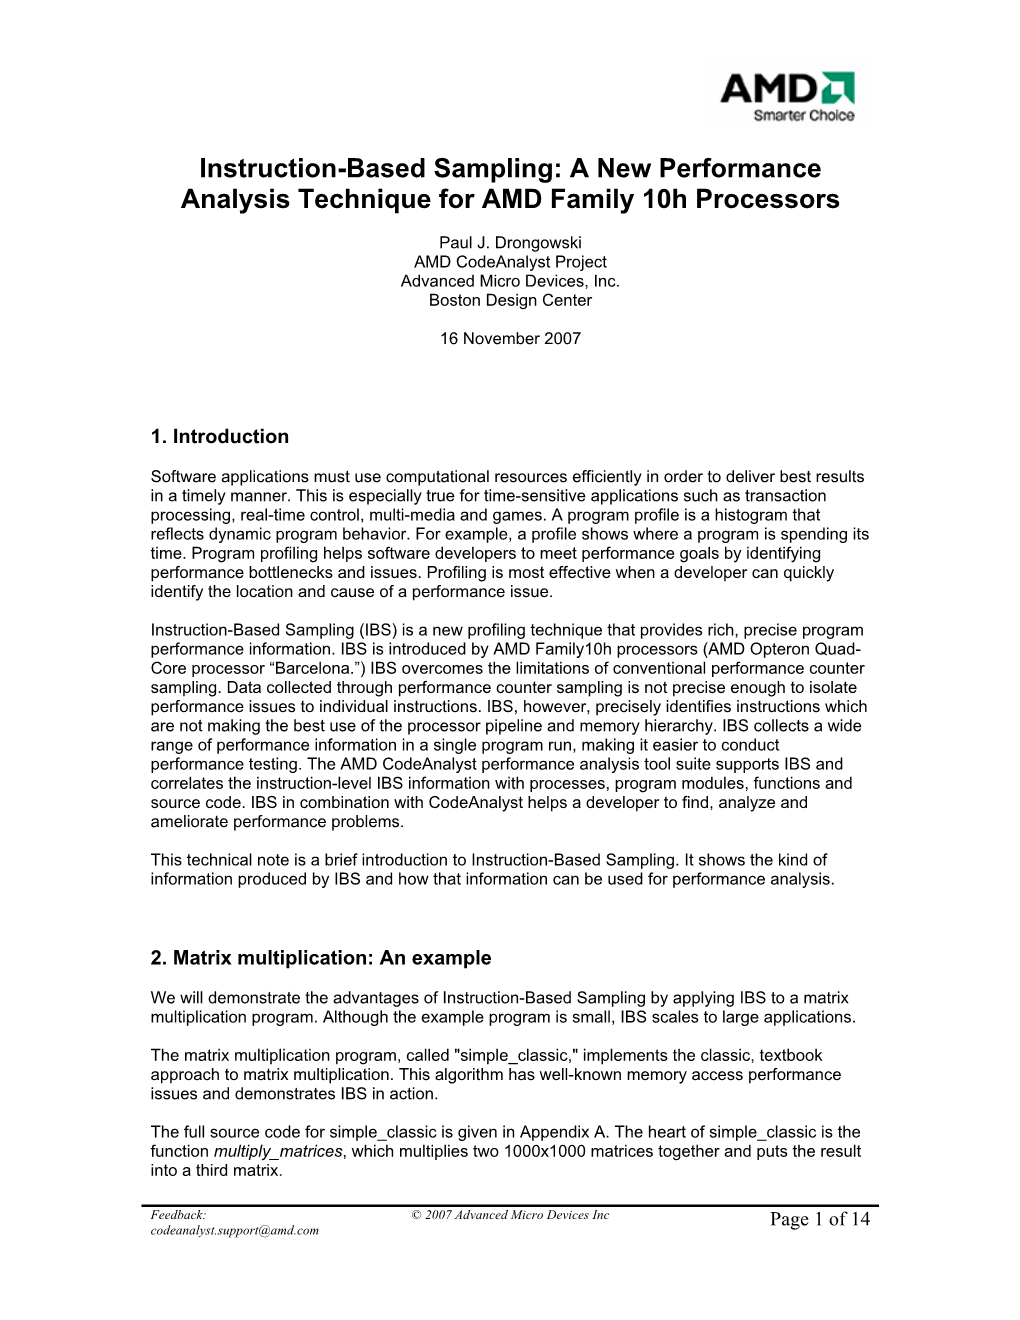 Instruction-Based Sampling: a New Performance Analysis Technique for AMD Family 10H Processors